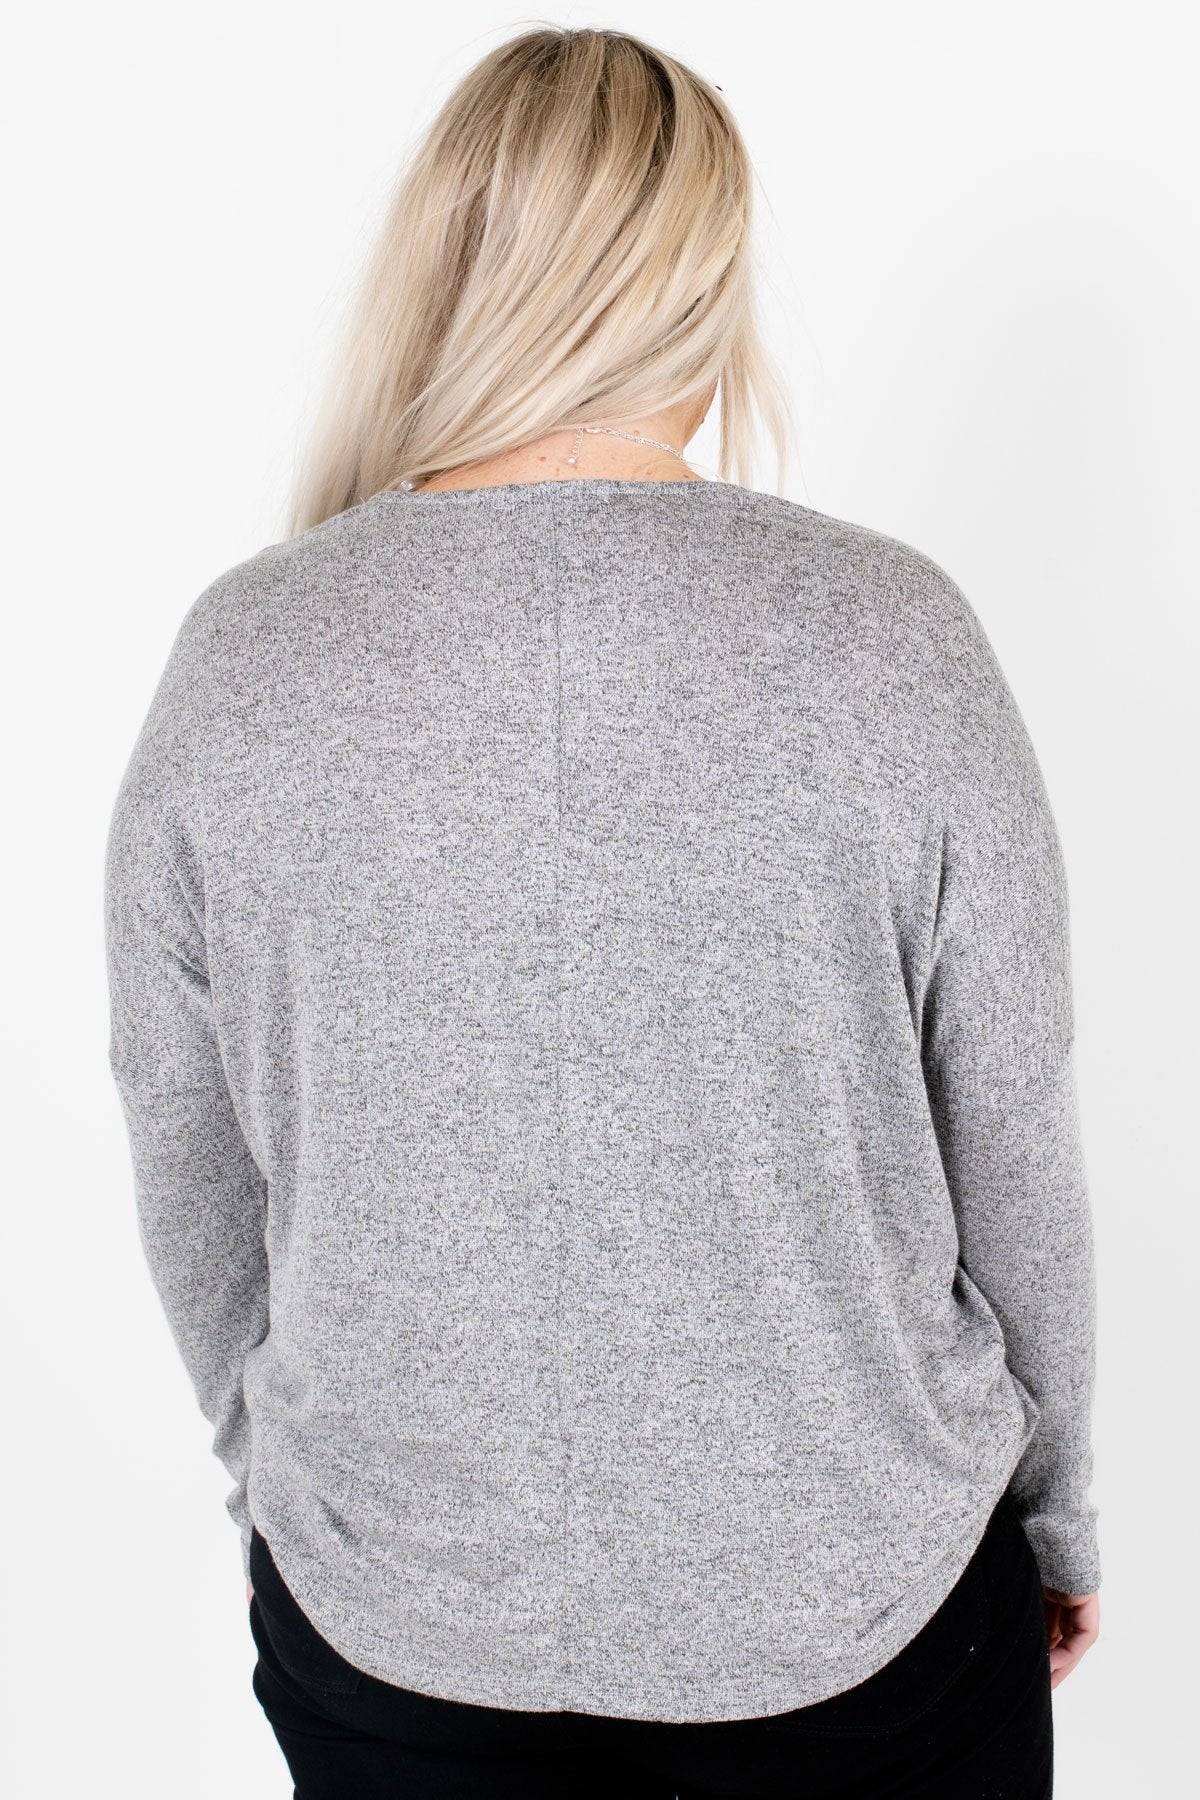 Women’s Heather Gray Long Sleeve Boutique Tops